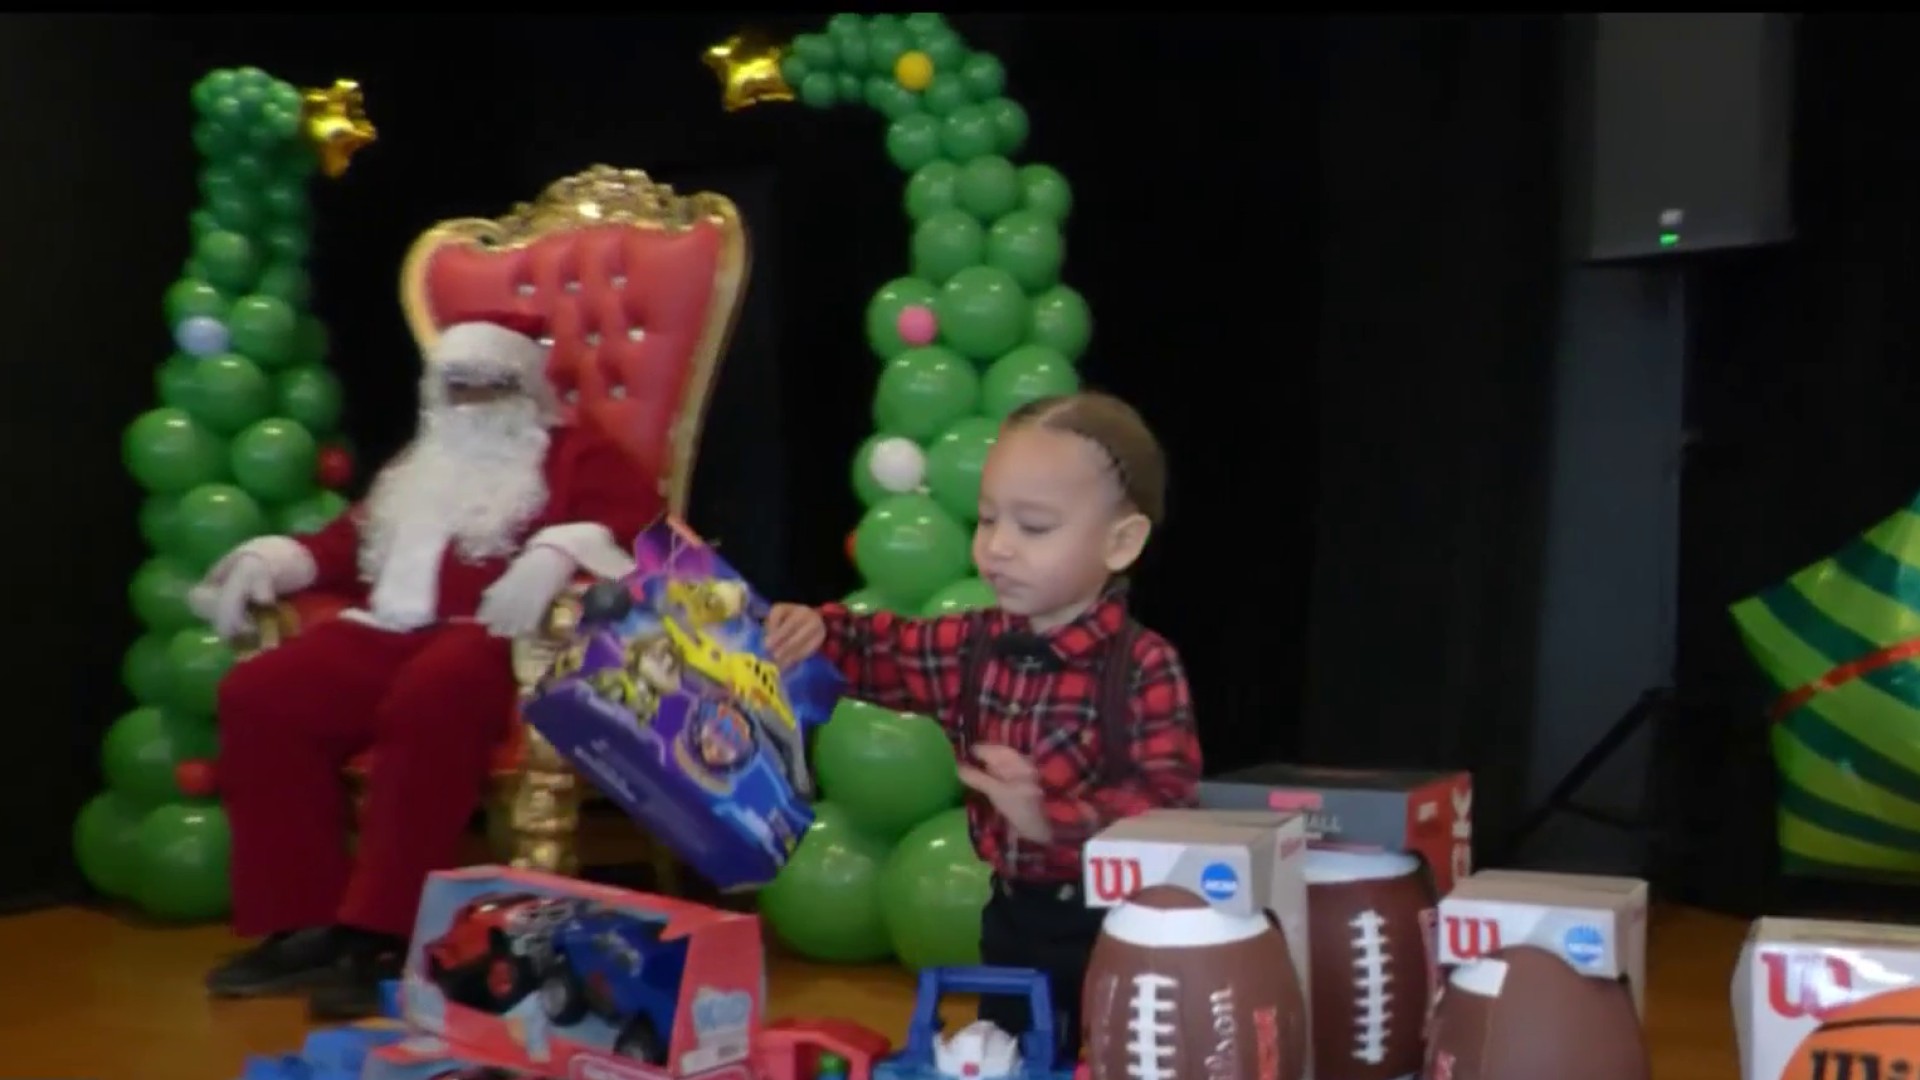 Santa surprises over 50 kids with gifts in San Pedro